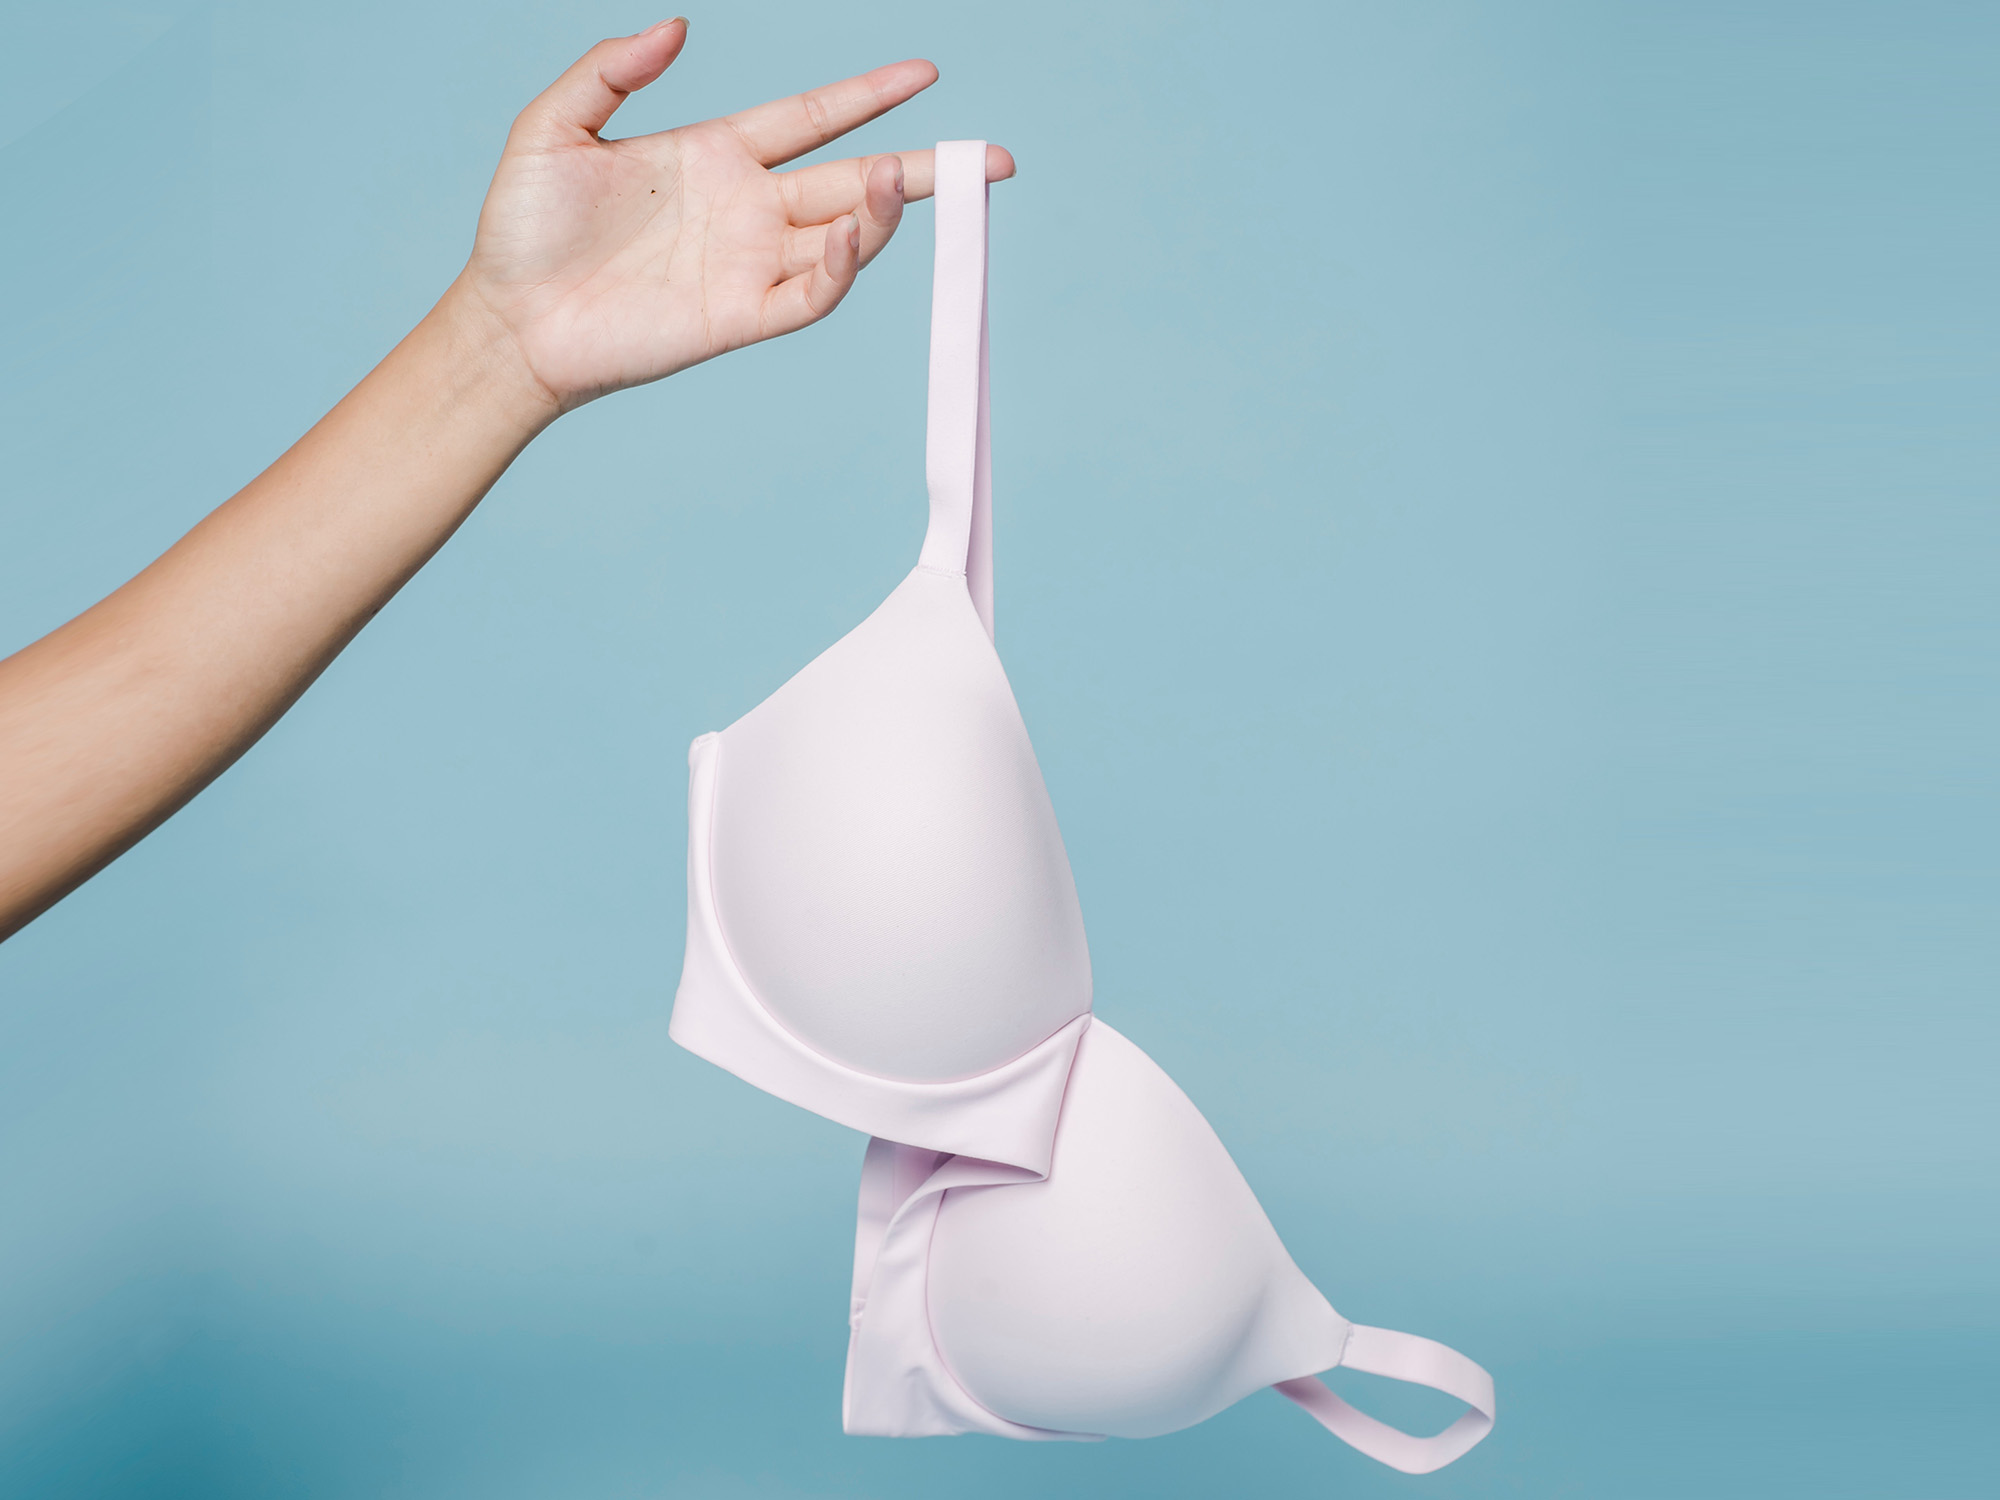 https://www.popsci.com/uploads/2022/05/28/hand-holding-out-a-white-bra-over-blue-background.jpg?auto=webp&width=1440&height=1080